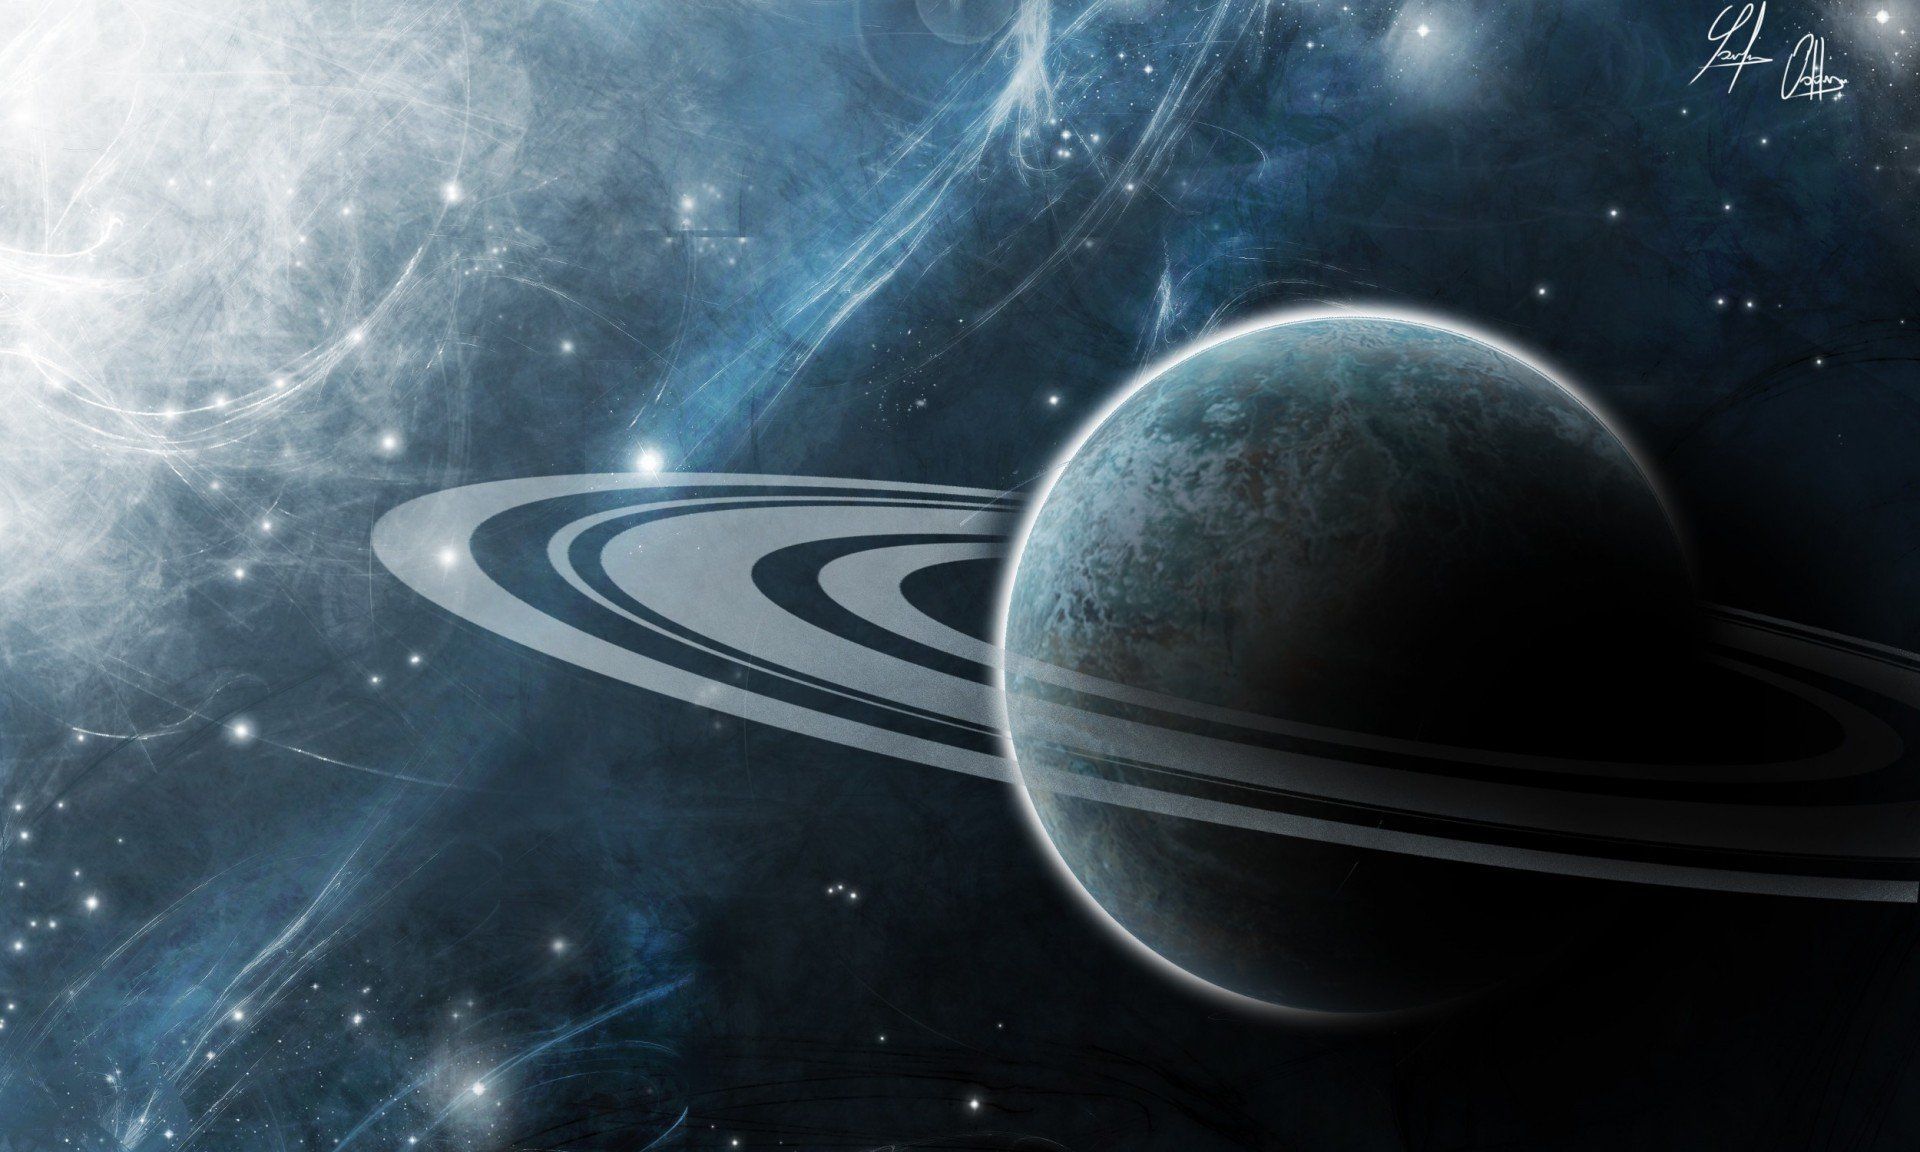 Free download saturn art rings universe planet space HD wallpaper [1920x1152] for your Desktop, Mobile & Tablet. Explore Saturn Wallpaper. Sailor Saturn Wallpaper, Saturn V Wallpaper, Rings of Saturn Wallpaper